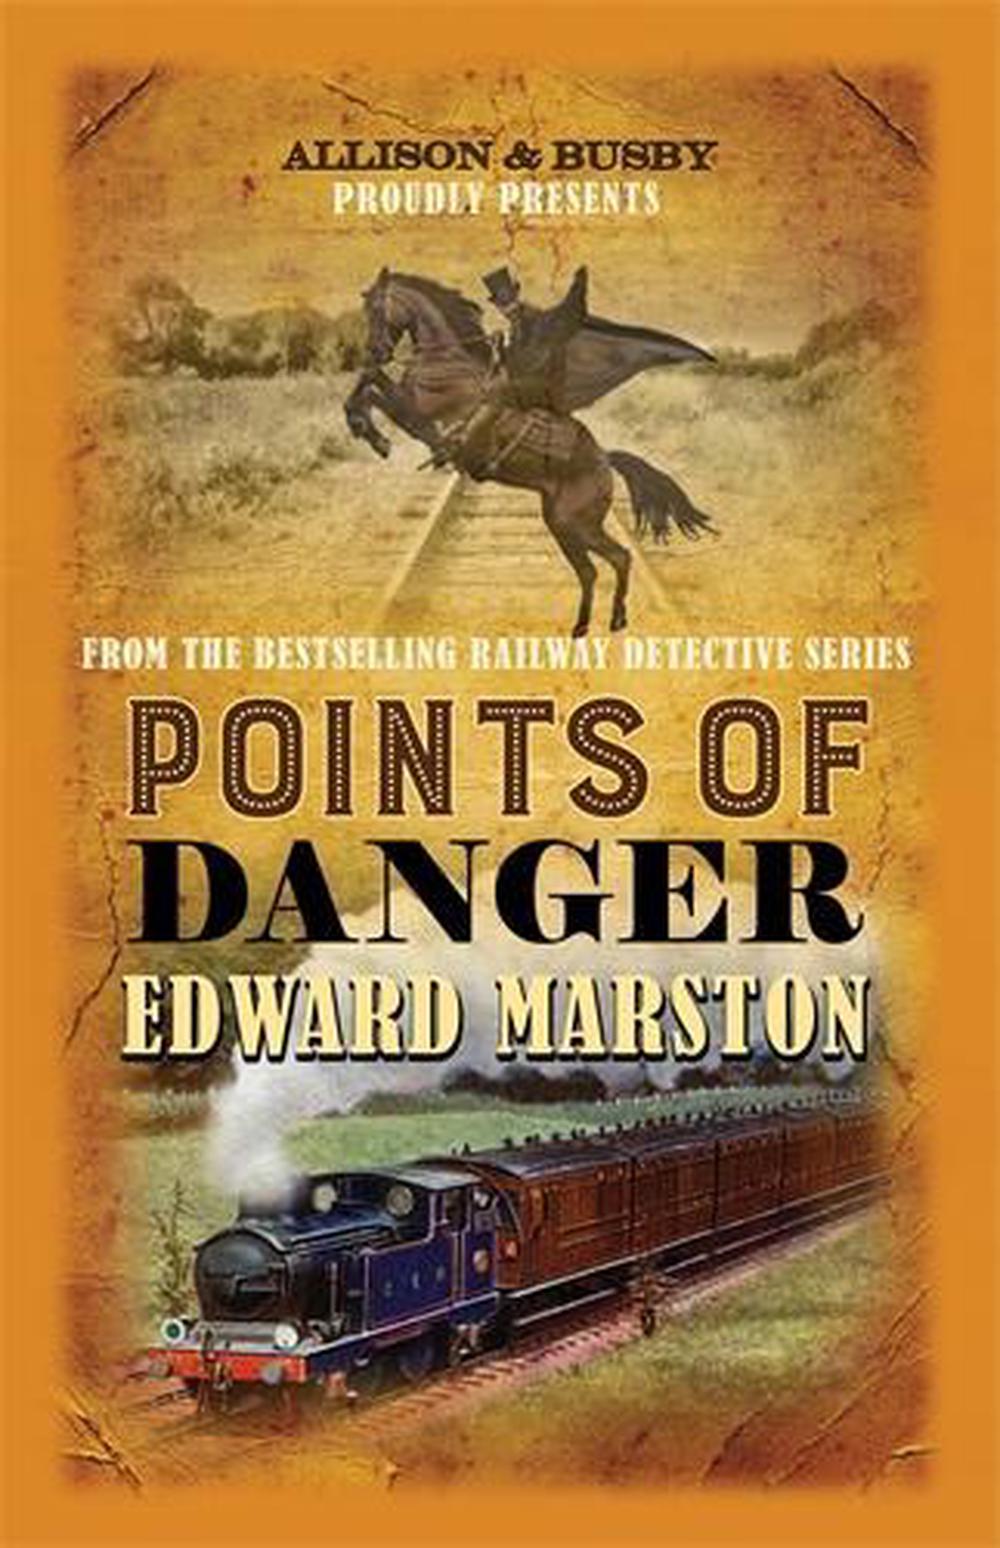 Points of Danger by Edward Marston (English) Paperback Book Free